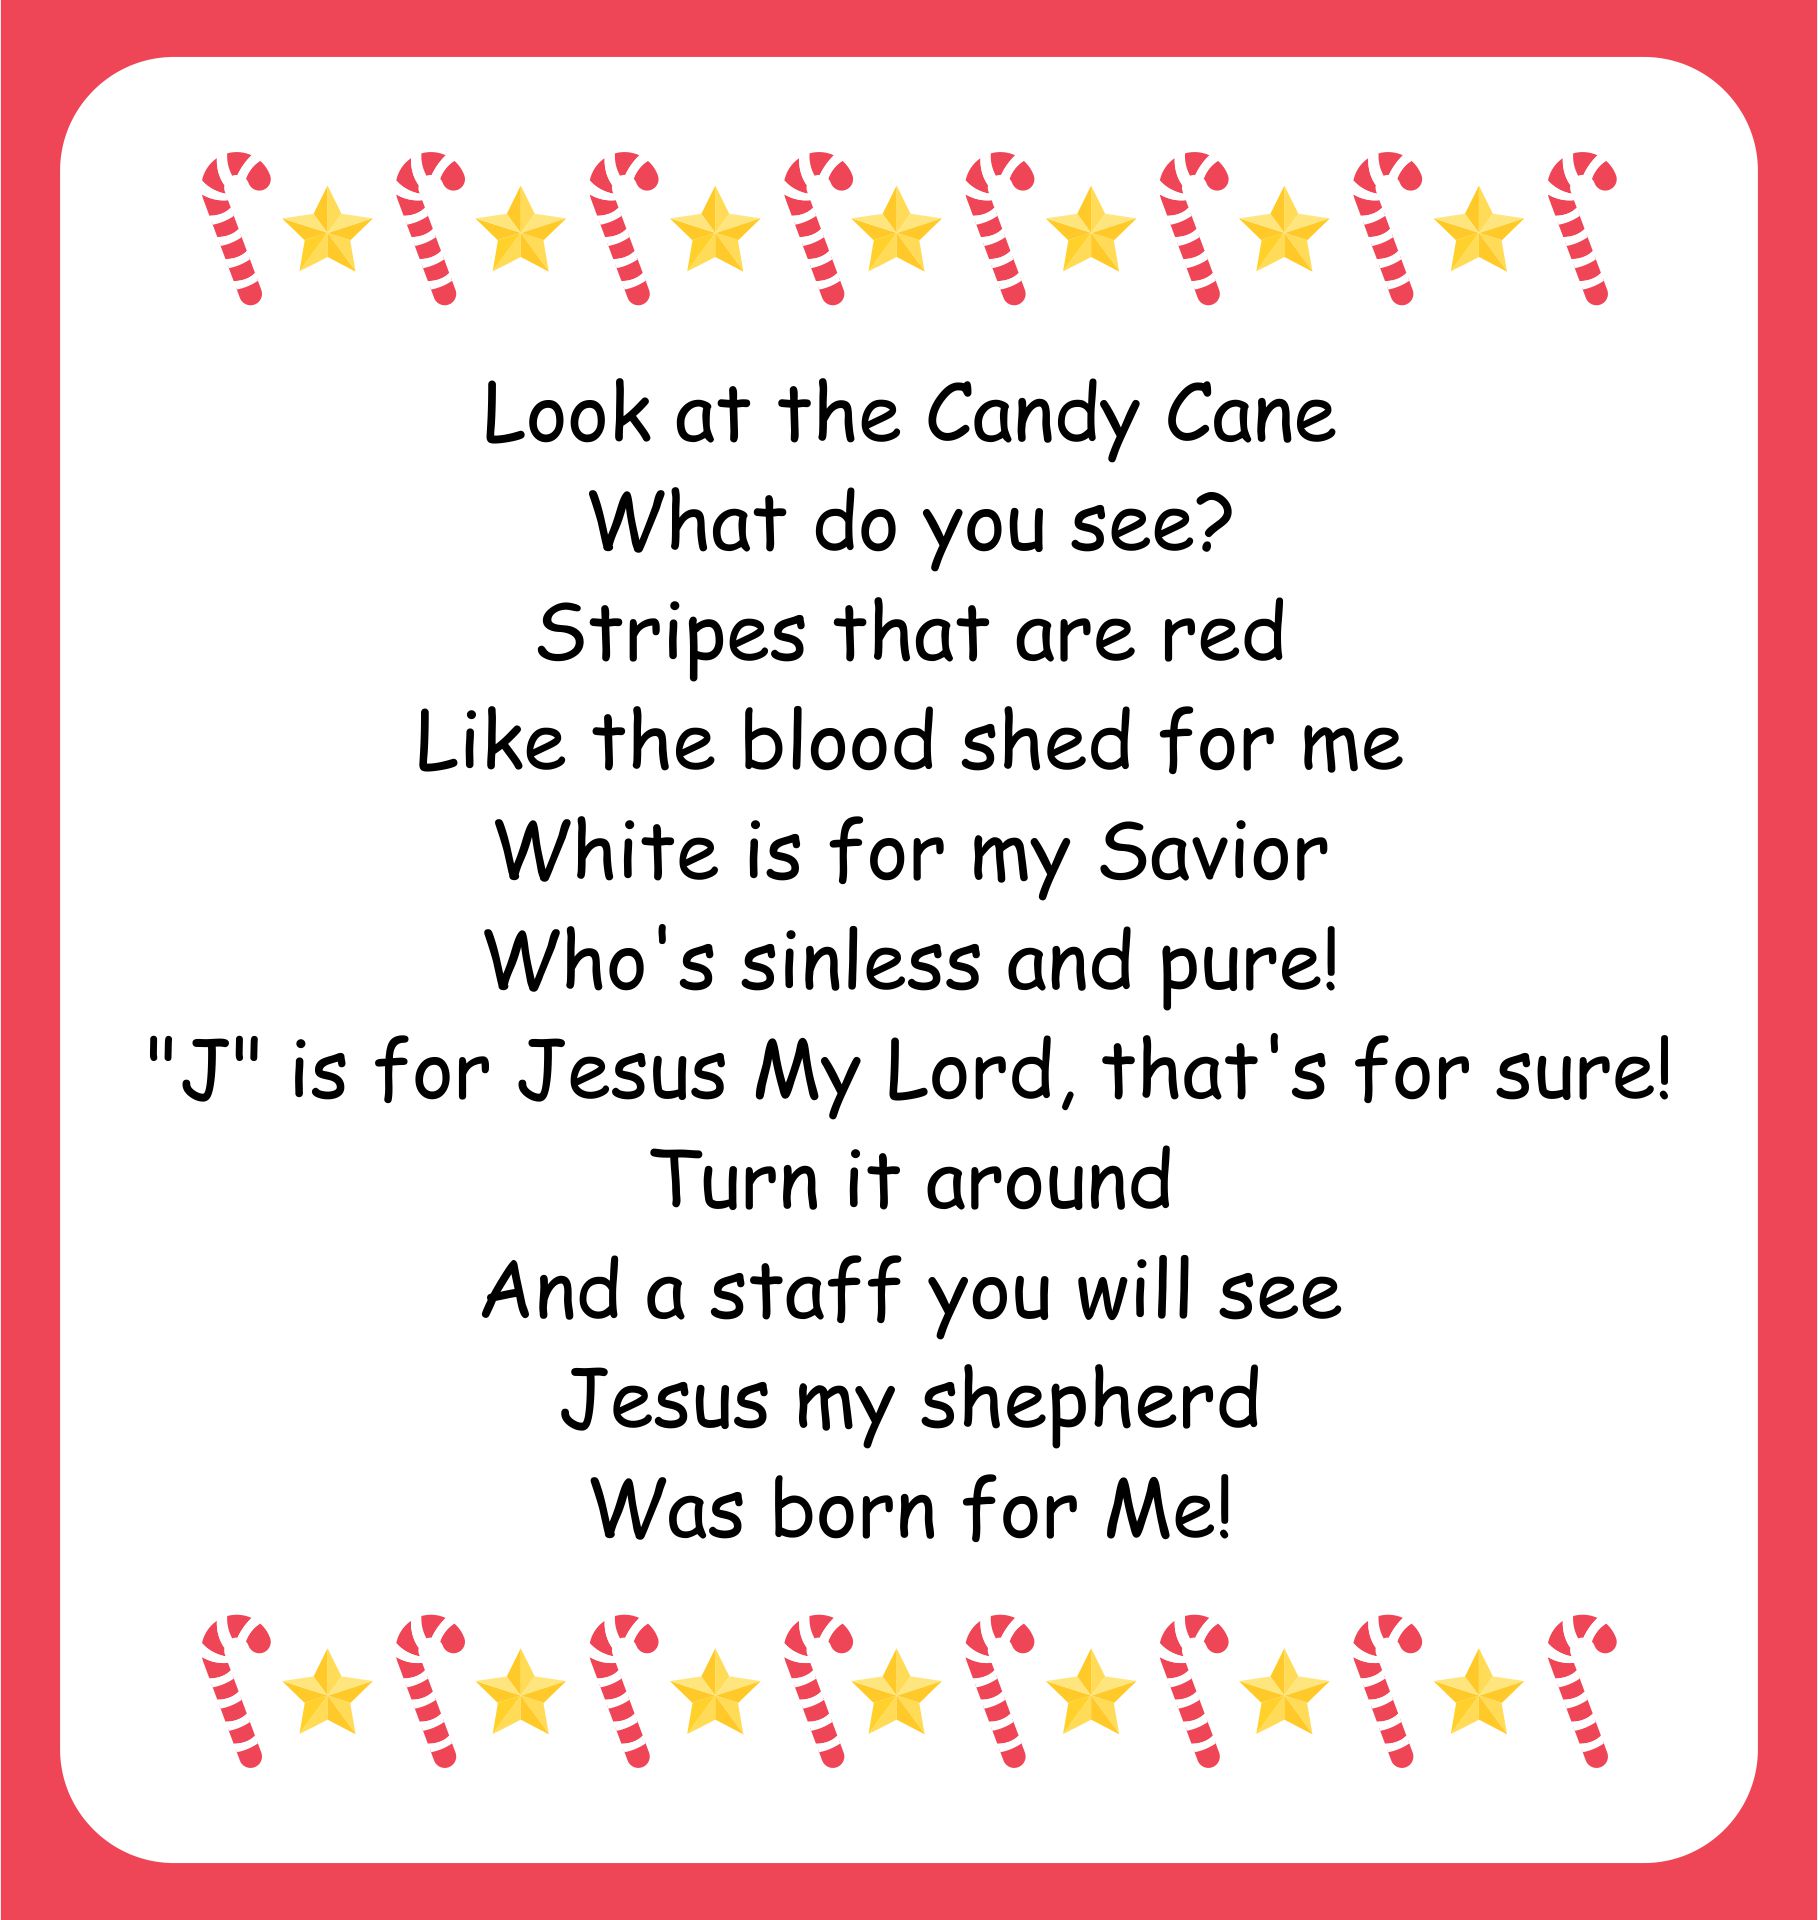 Candy Cane Legend Printable